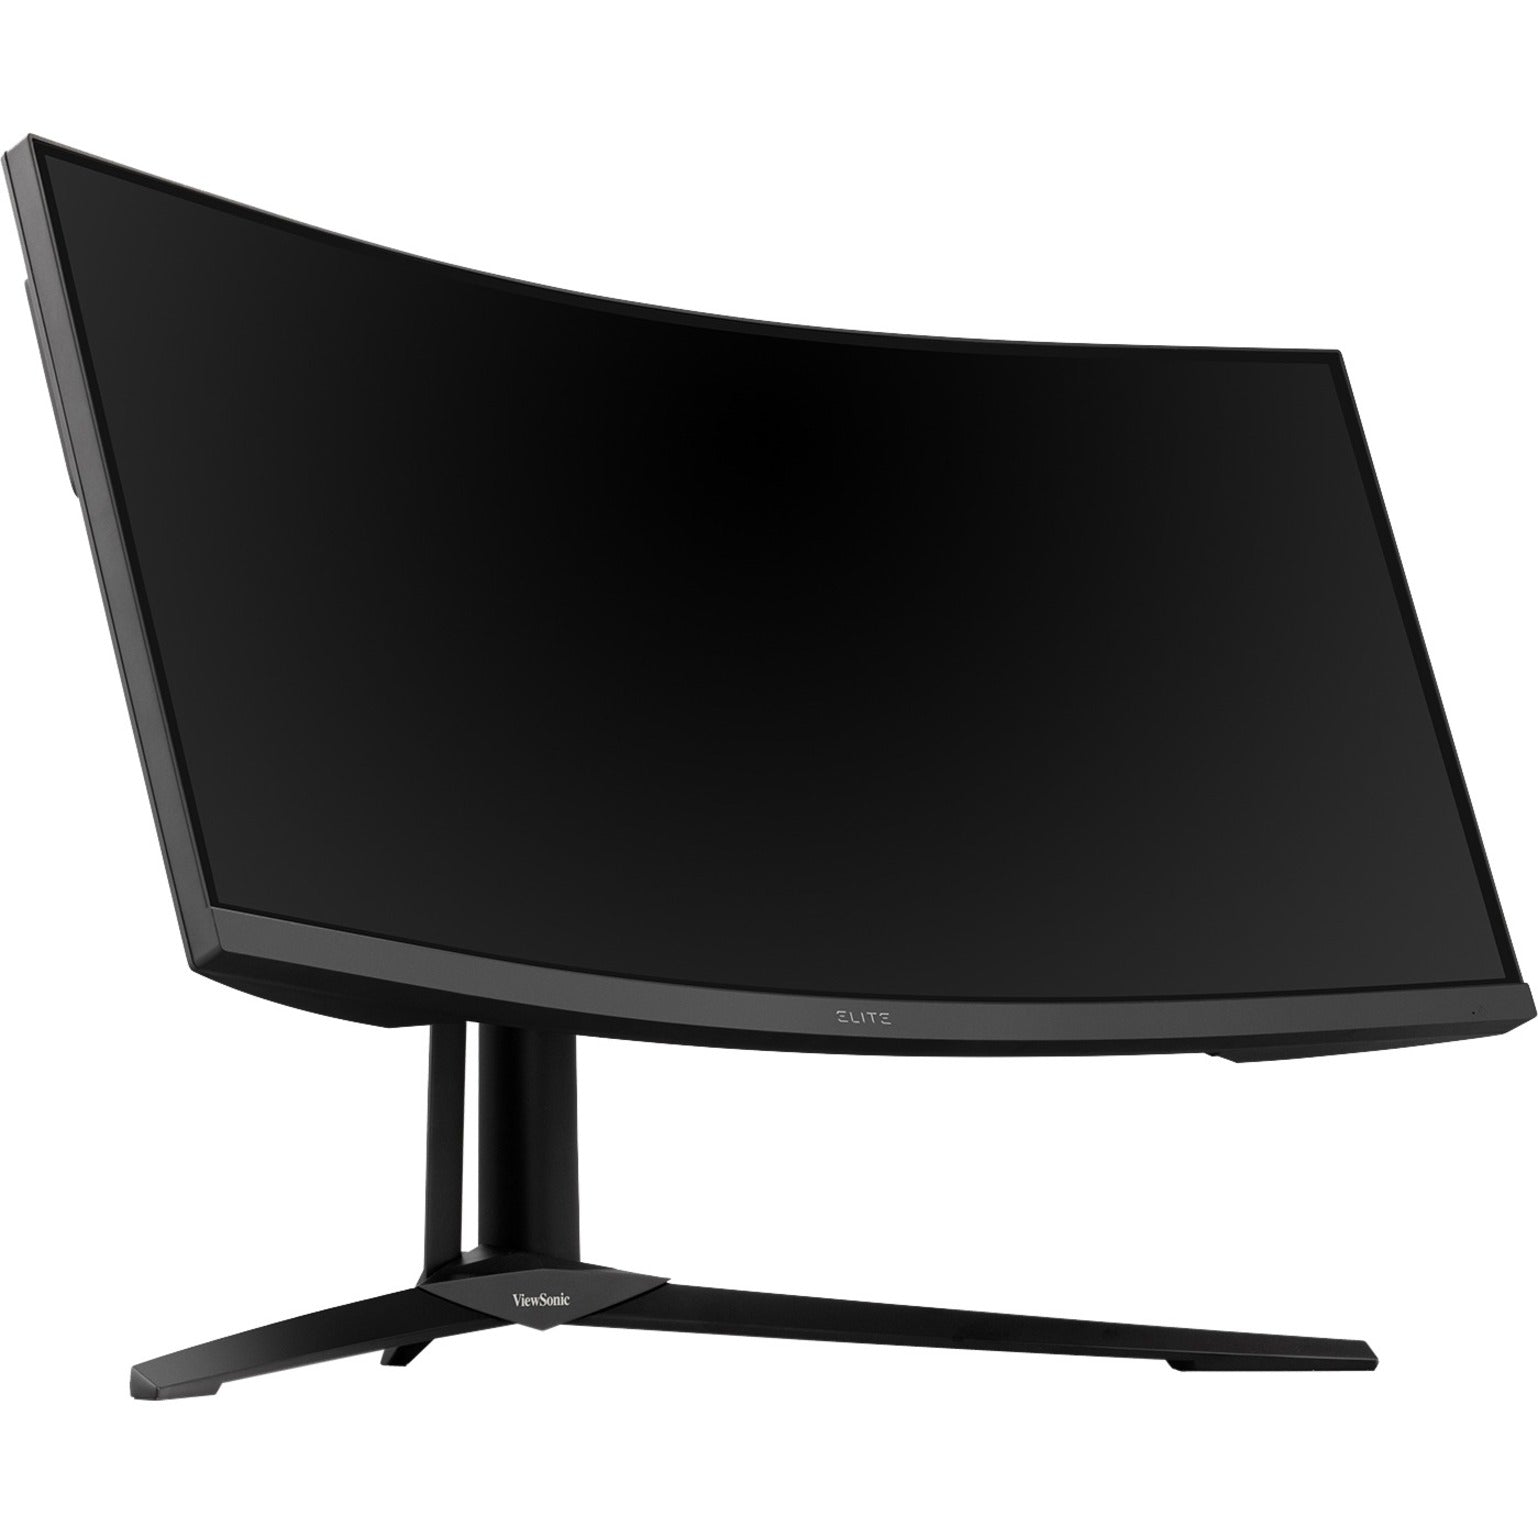 ViewSonic Elite XG341C-2K 34-inch Curved Mini LED Gaming Monitor Review:  Elite Color and Image Quality